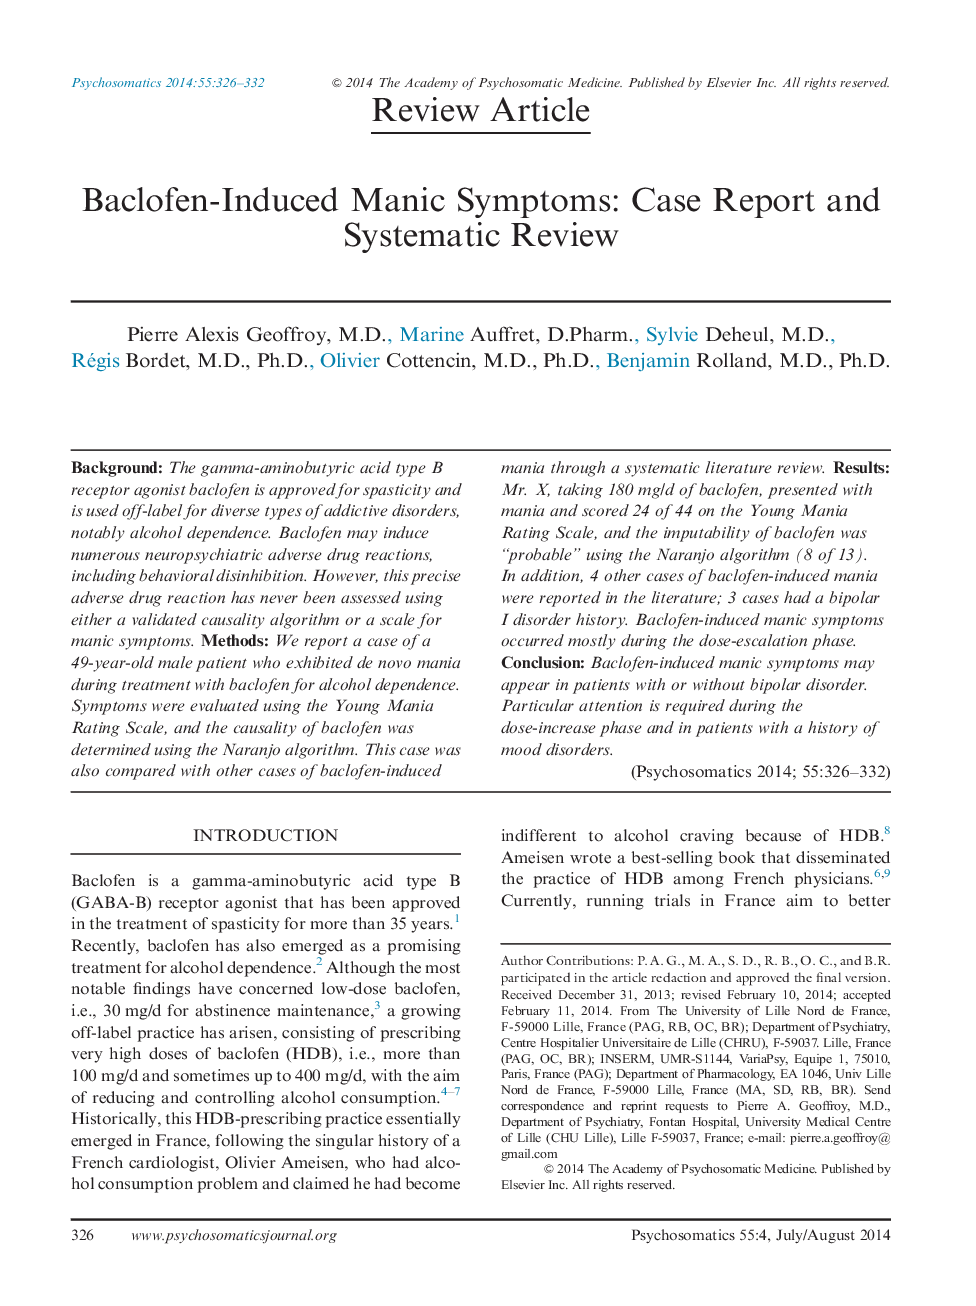 Baclofen-Induced Manic Symptoms: Case Report and Systematic Review 